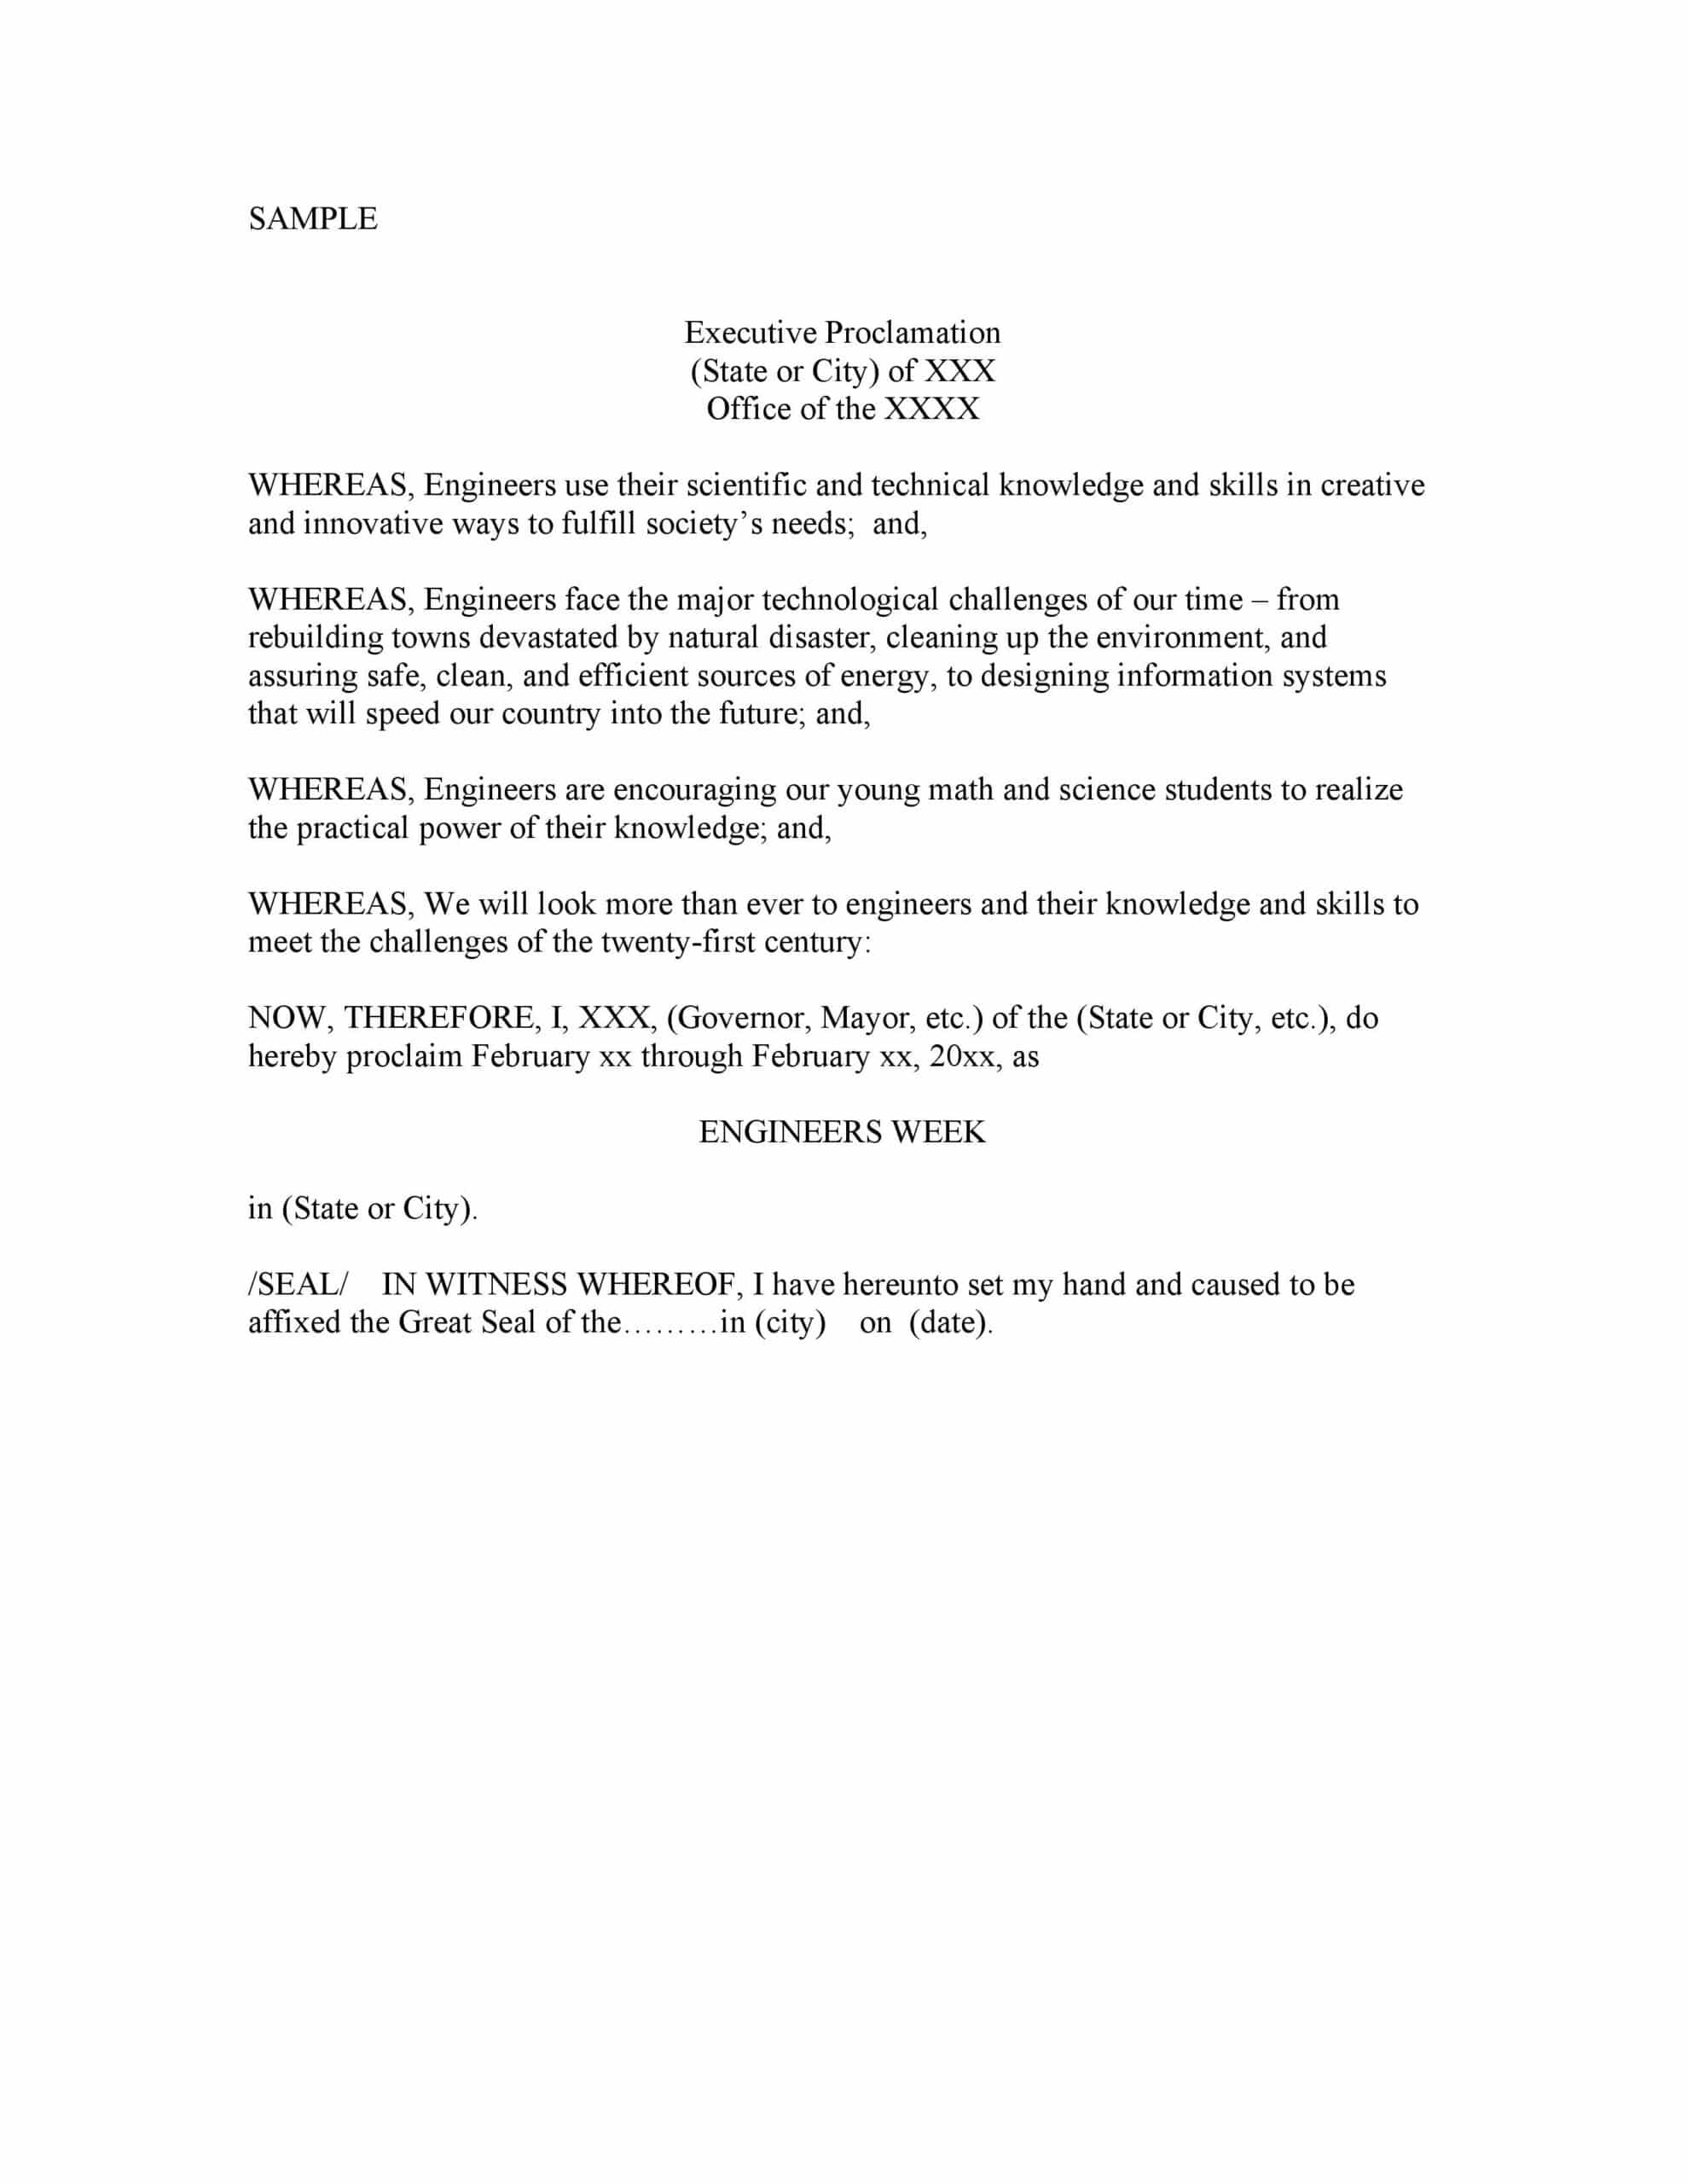 DiscoverE Engineers Week Proclamation Example